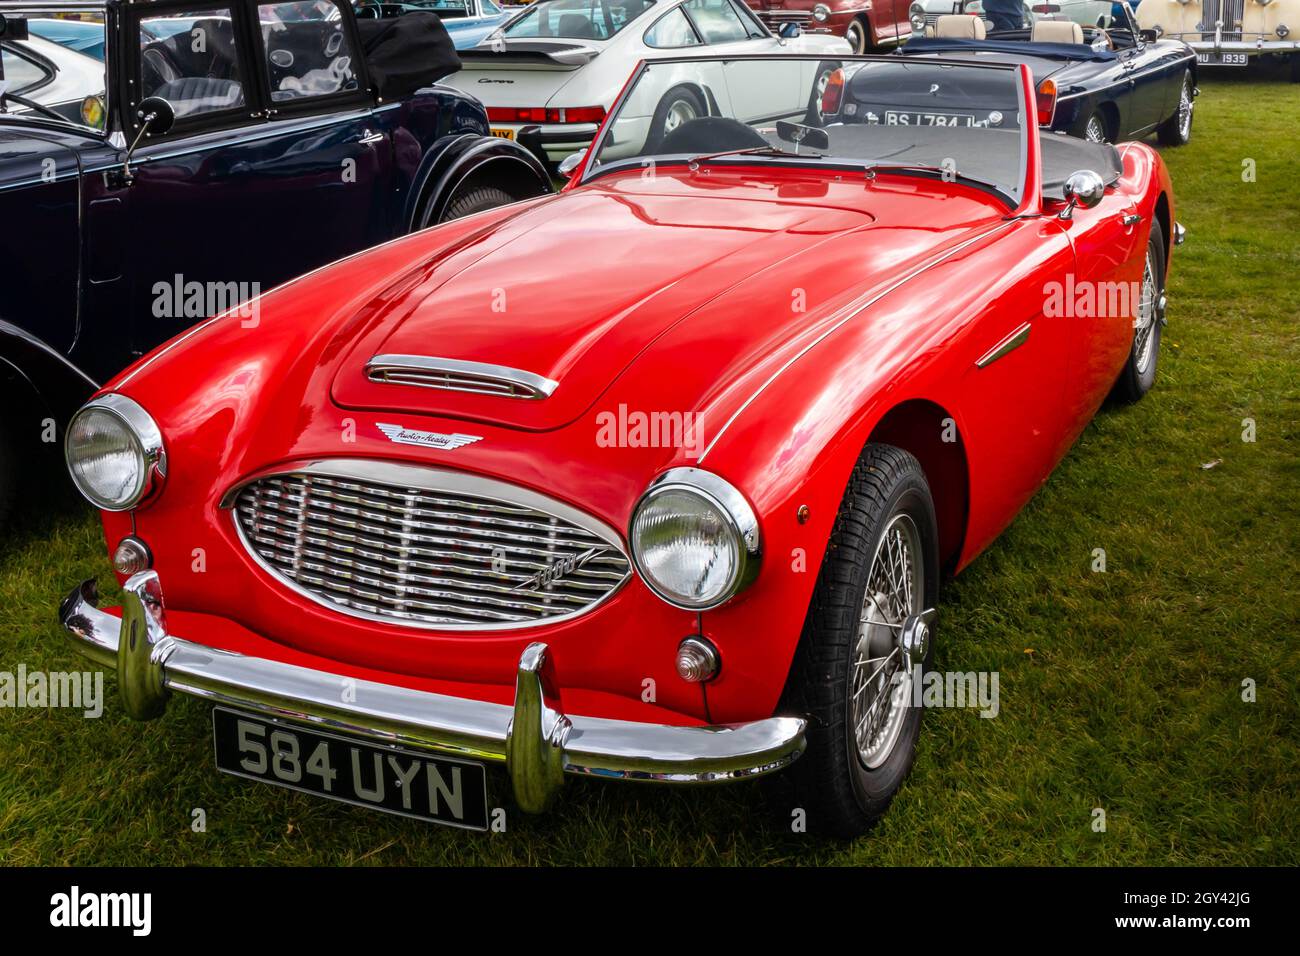 Naphill, England - August 29th 2021: A red Austin Healey 3000 sports car. This is an iconic Britiah sports car Stock Photo